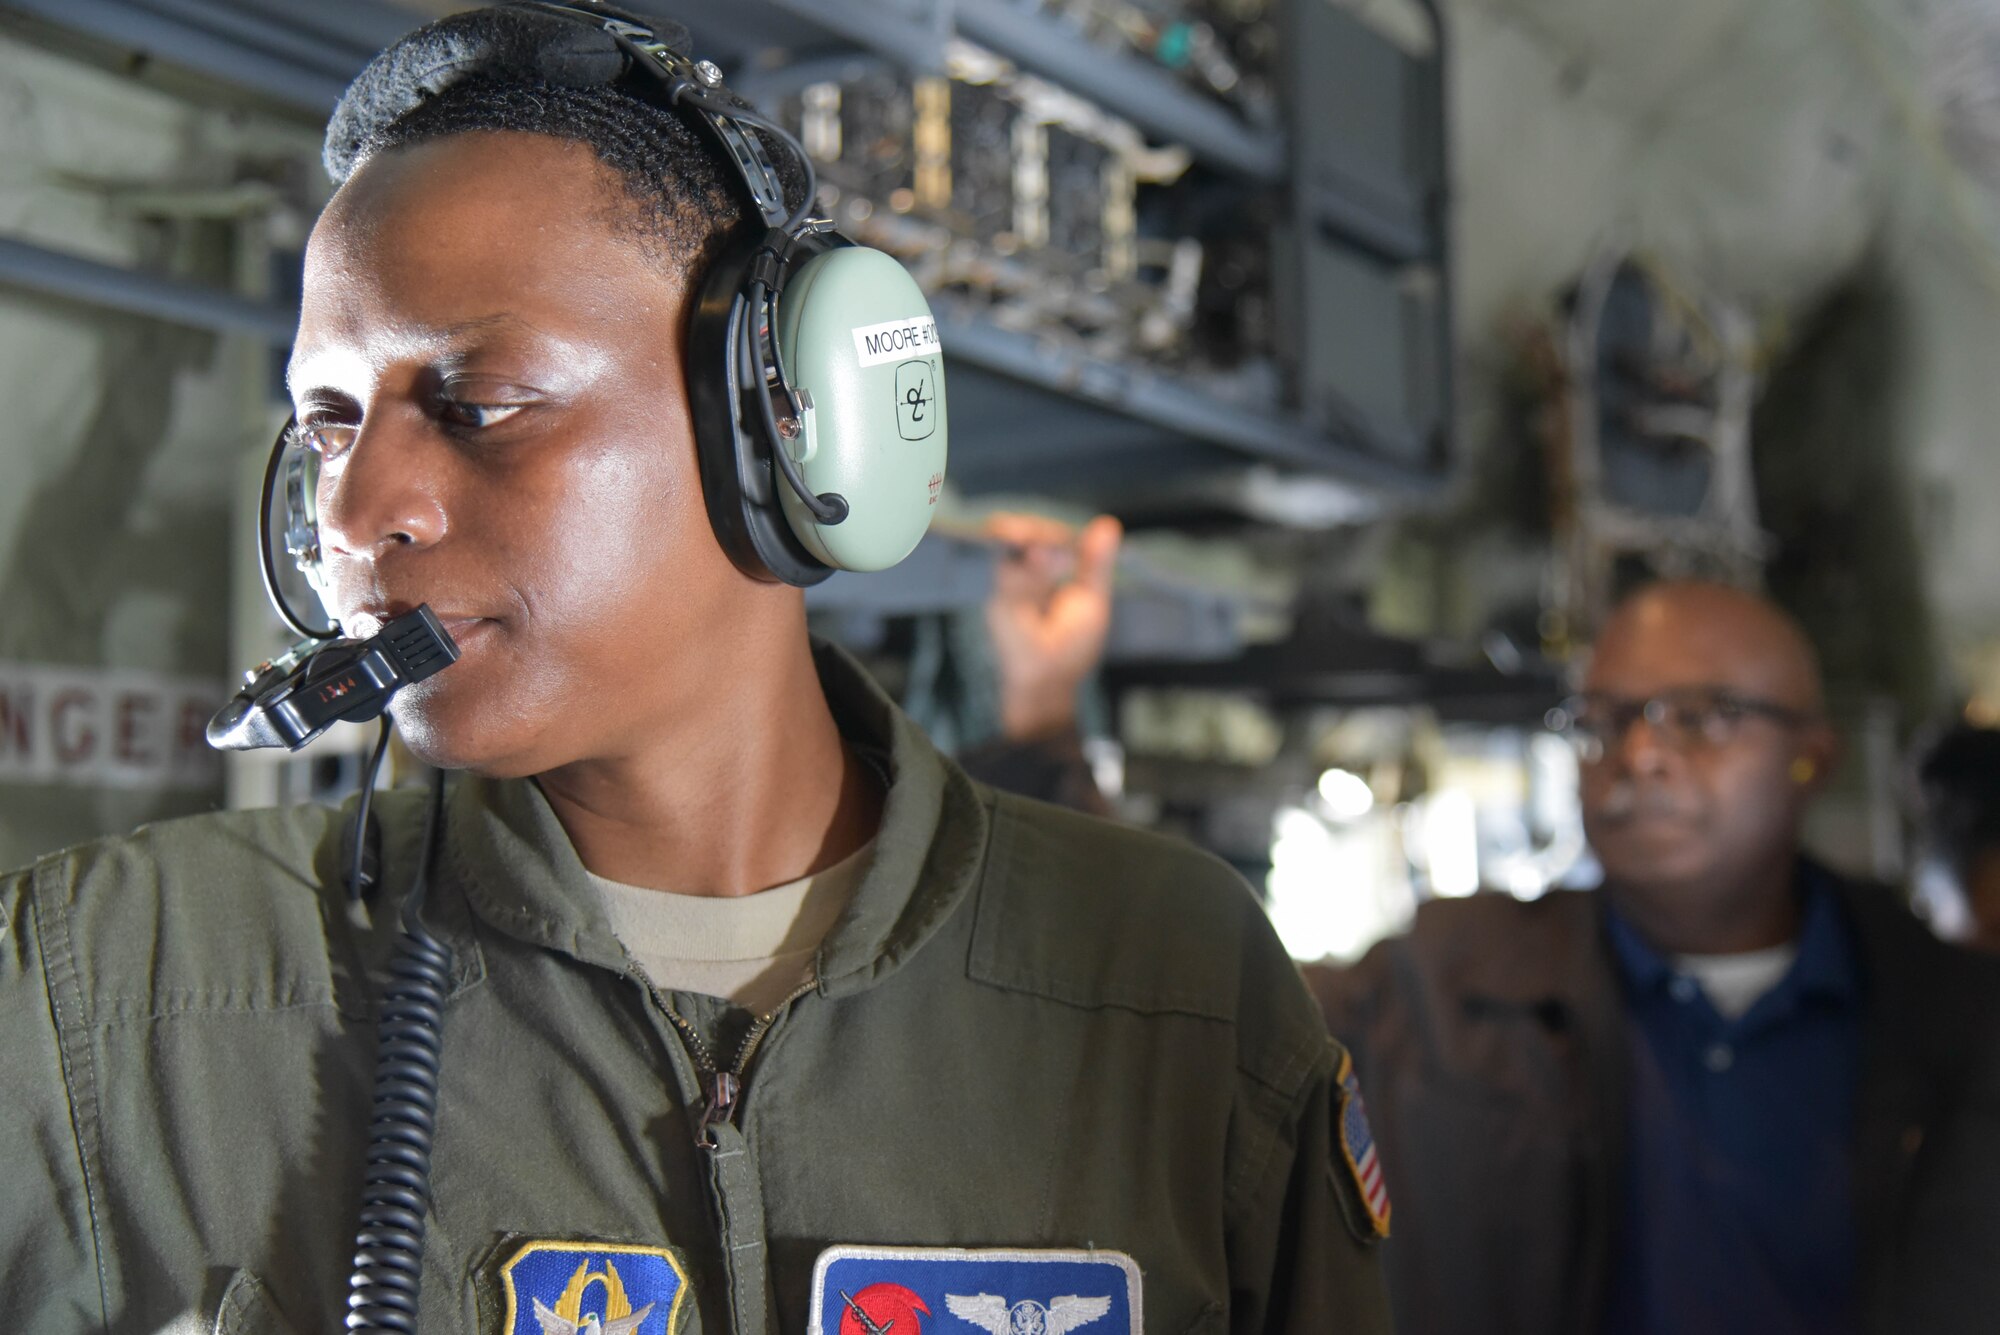 Tech. Sgt. Karen Moore, 53rd Weather Reconnaissance Squadron, demonstrates her job duties to Keesler Air Force Base, Miss., Honorary Commanders during a training flight on a WC-130J Hercules March. 8, 2019.The 403rd Wing, an Air Force Reserve Command unit, hosted the group for a tour of the wing highlighting several of the unit’s missions to include the 815th Airlift Squadron, 36th Aermedical Evacuation, and a flight with the Air Force Reserve Hurricane Hunters. (U.S. Air Force photo by Tech. Sgt. Michael Farrar)